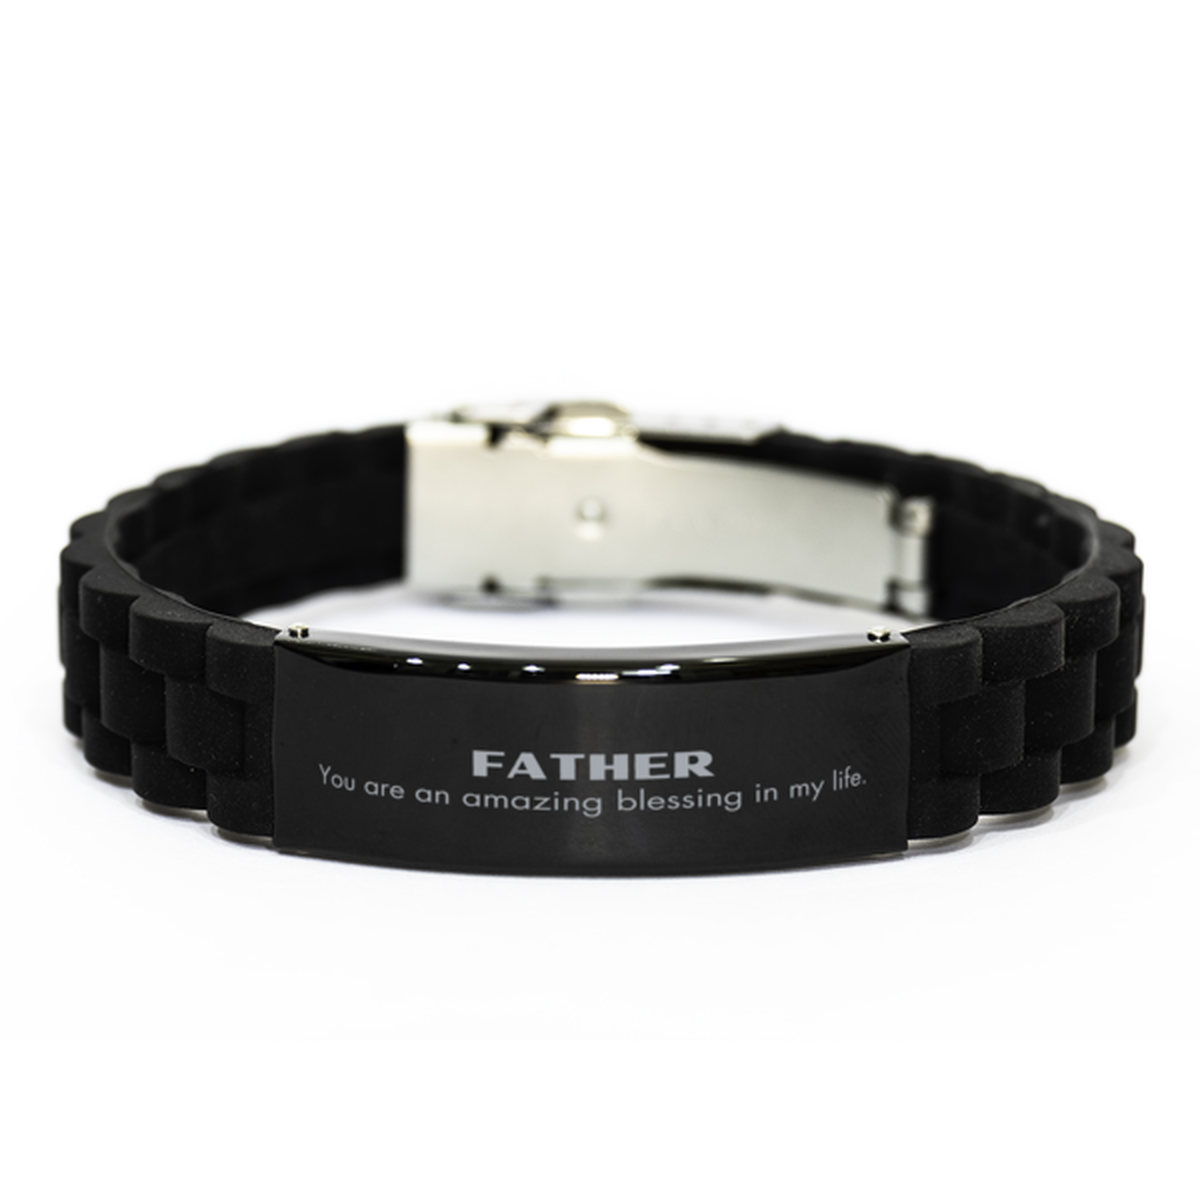 Father Black Glidelock Clasp Bracelet, You are an amazing blessing in my life, Thank You Gifts For Father, Inspirational Birthday Christmas Unique Gifts For Father